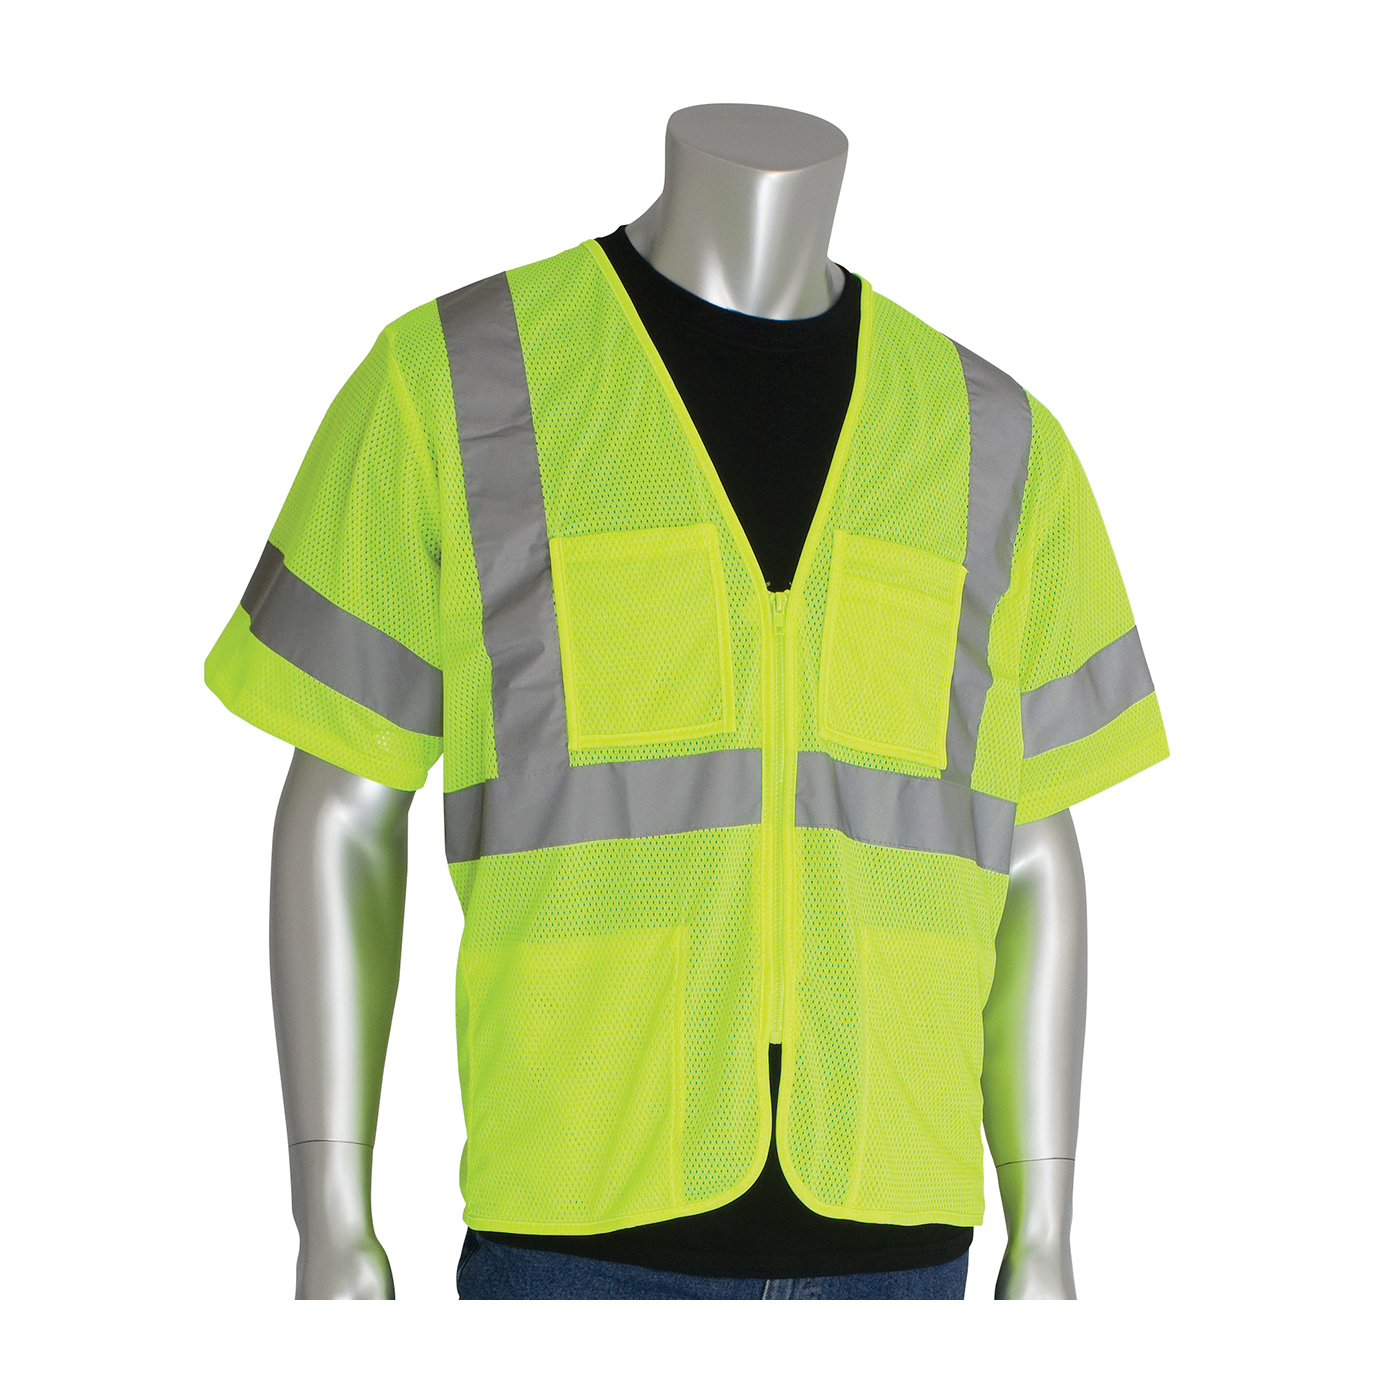 PIP® 303-MVGZ4P-LY/2X Safety Vest, 2XL, Hi-Viz Lime Yellow, Polyester Mesh, Zipper Closure, 4 Pockets, ANSI Class: Class 3, Specifications Met: ANSI 107 Type R